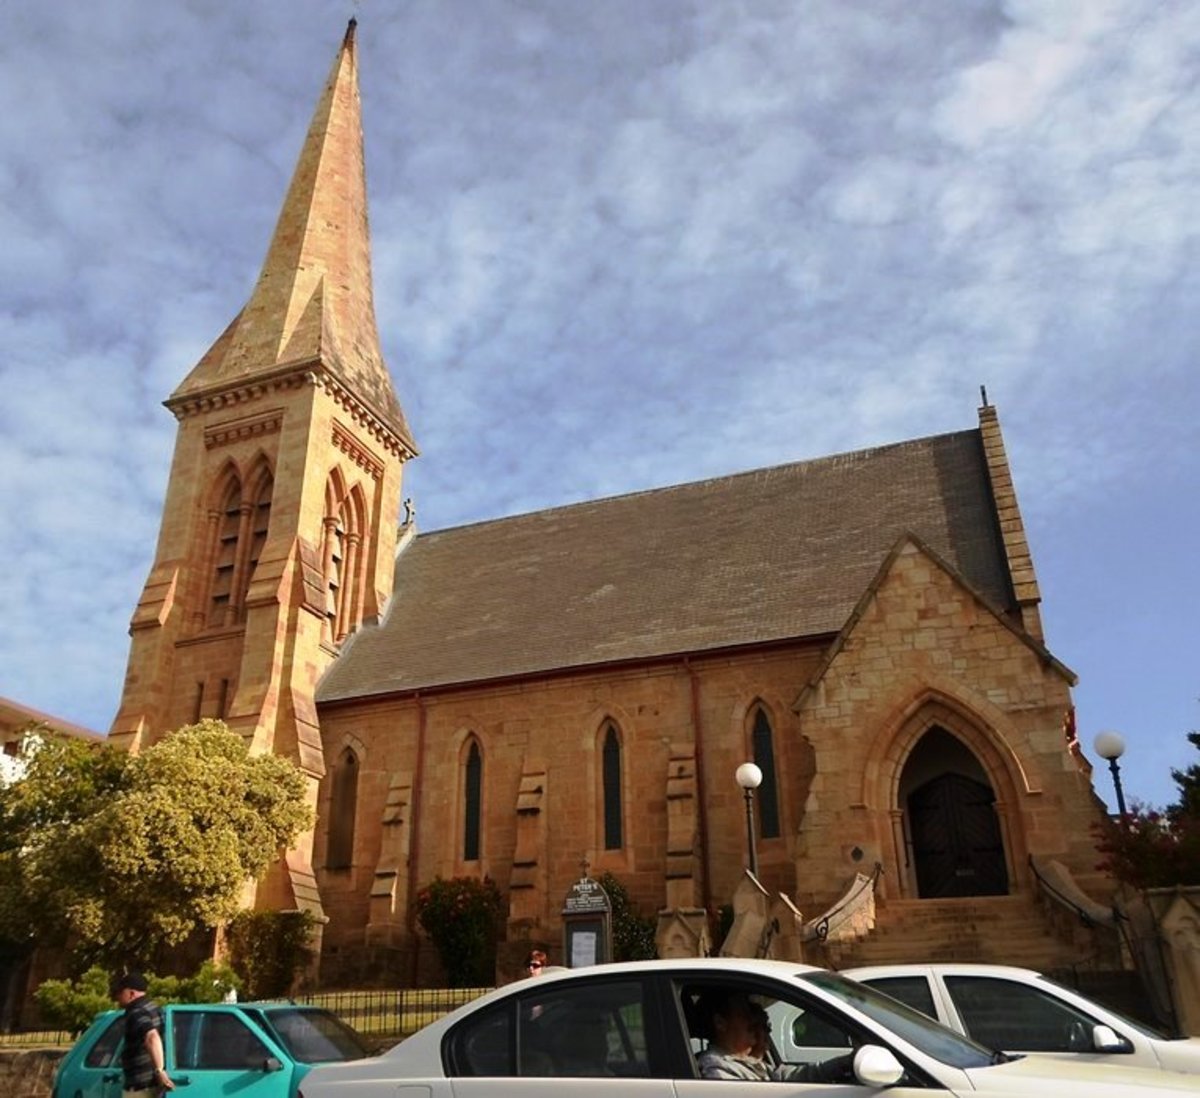 St. Peter's Anglican Church built in 1878, Mossel Bay, Western Cape, South Africa 